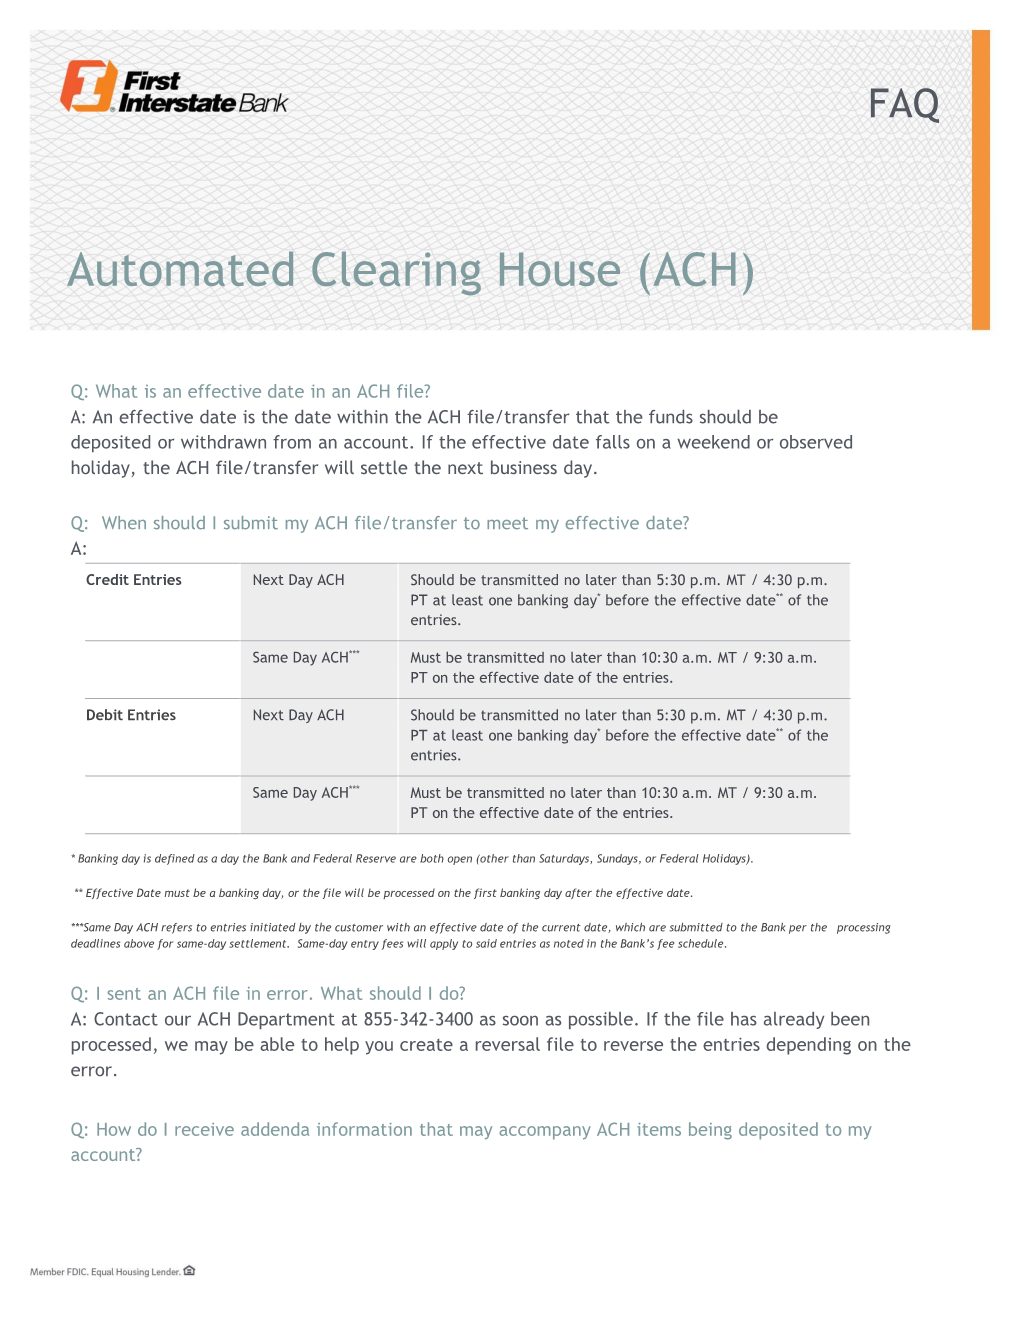 Automated Clearing House (ACH)